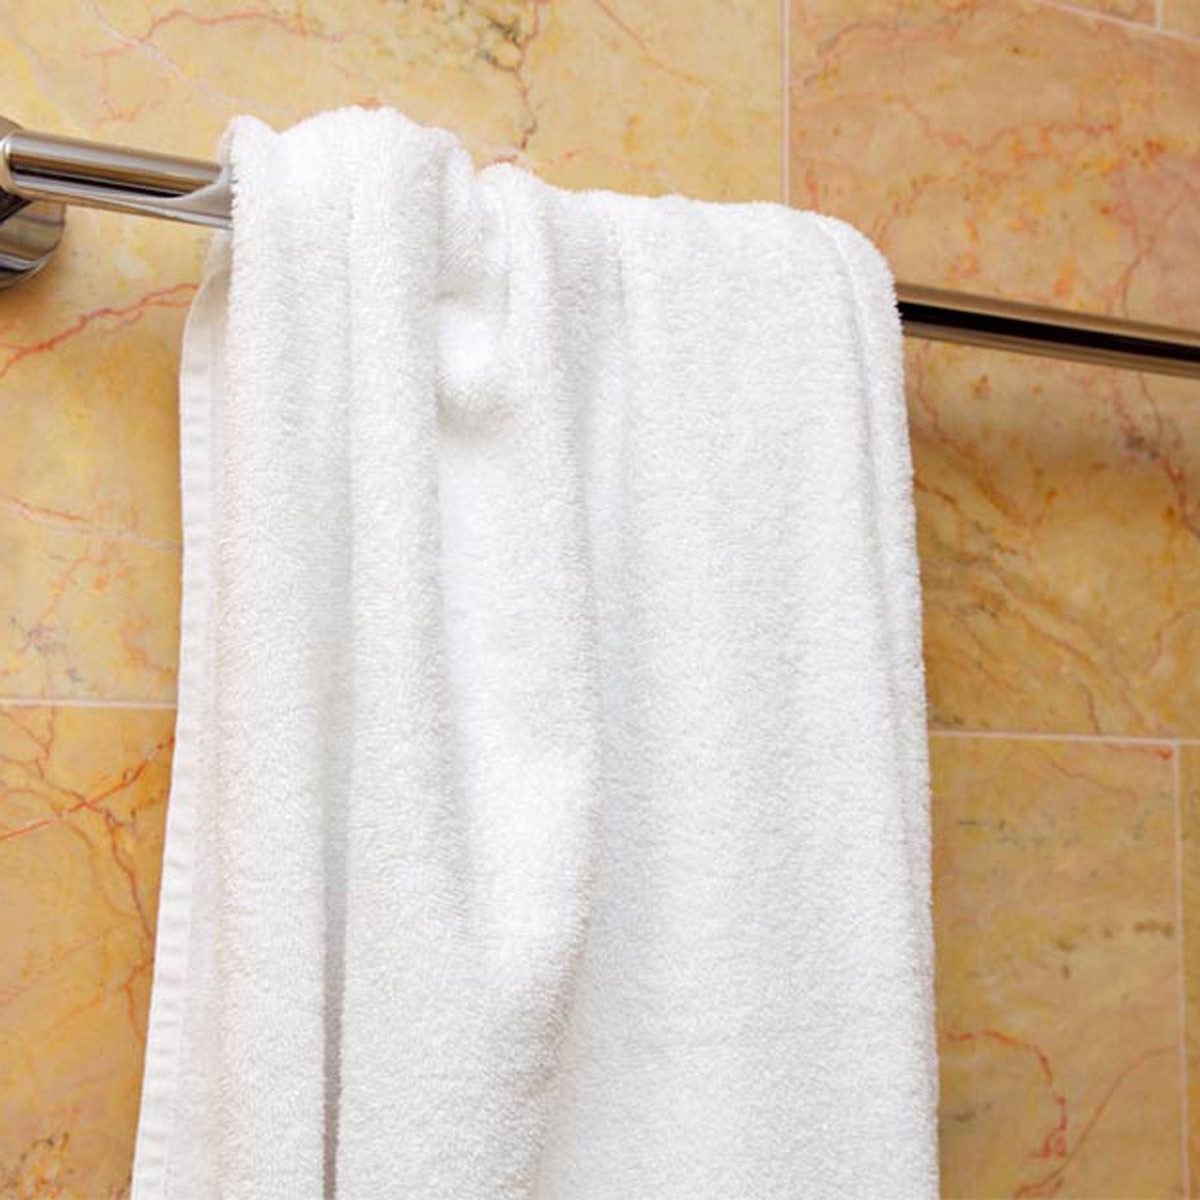 How Often Should You Change & Wash Your Towels?